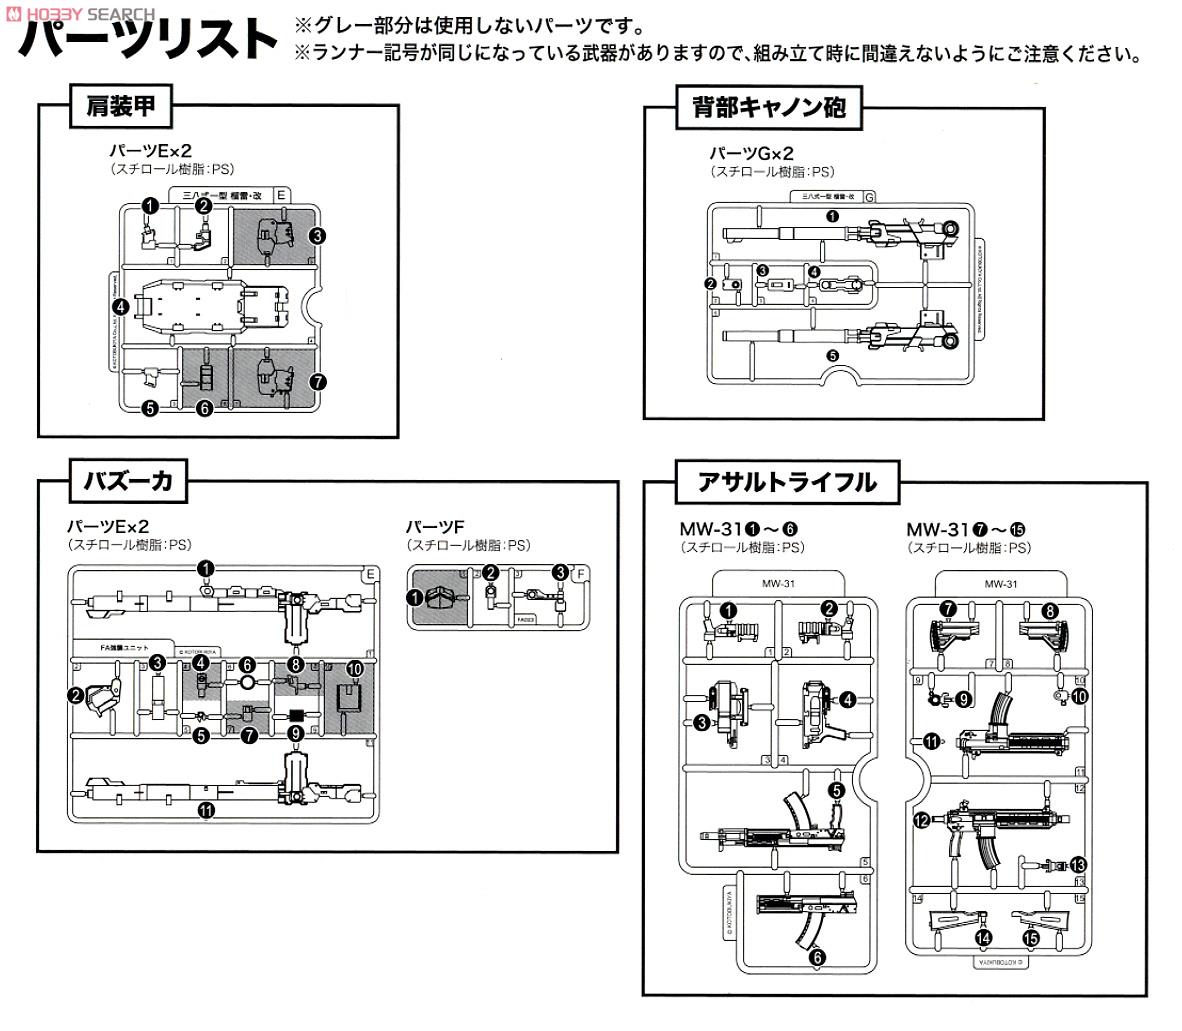 Frame Arms Girl Weapon Set 1 (Plastic model) Assembly guide4